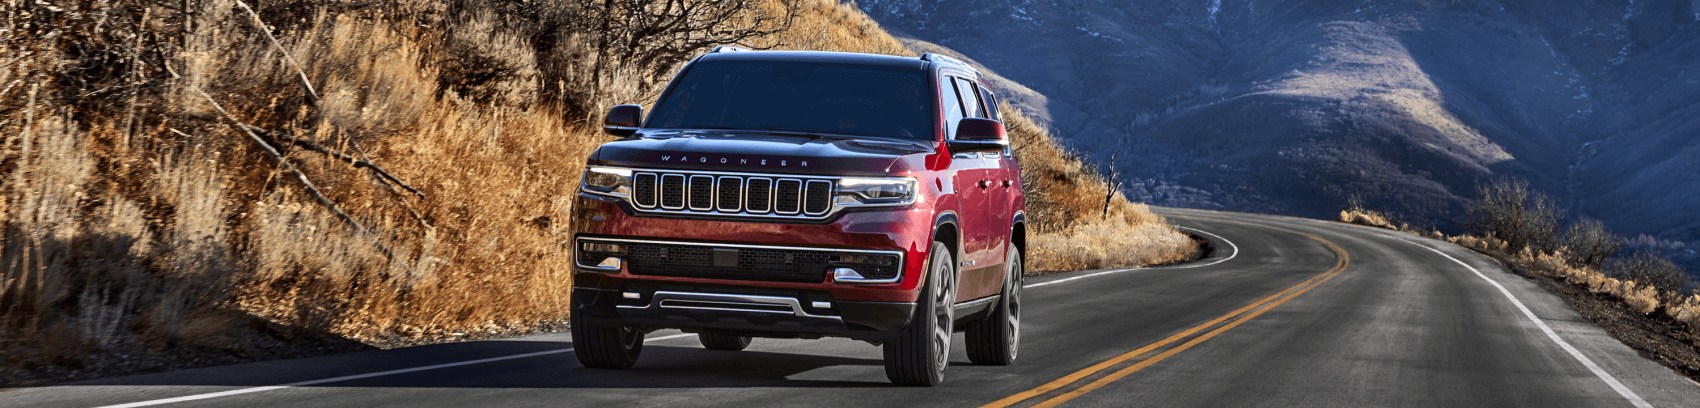 2022 Jeep Wagoneer Red Highway Distant Mountains